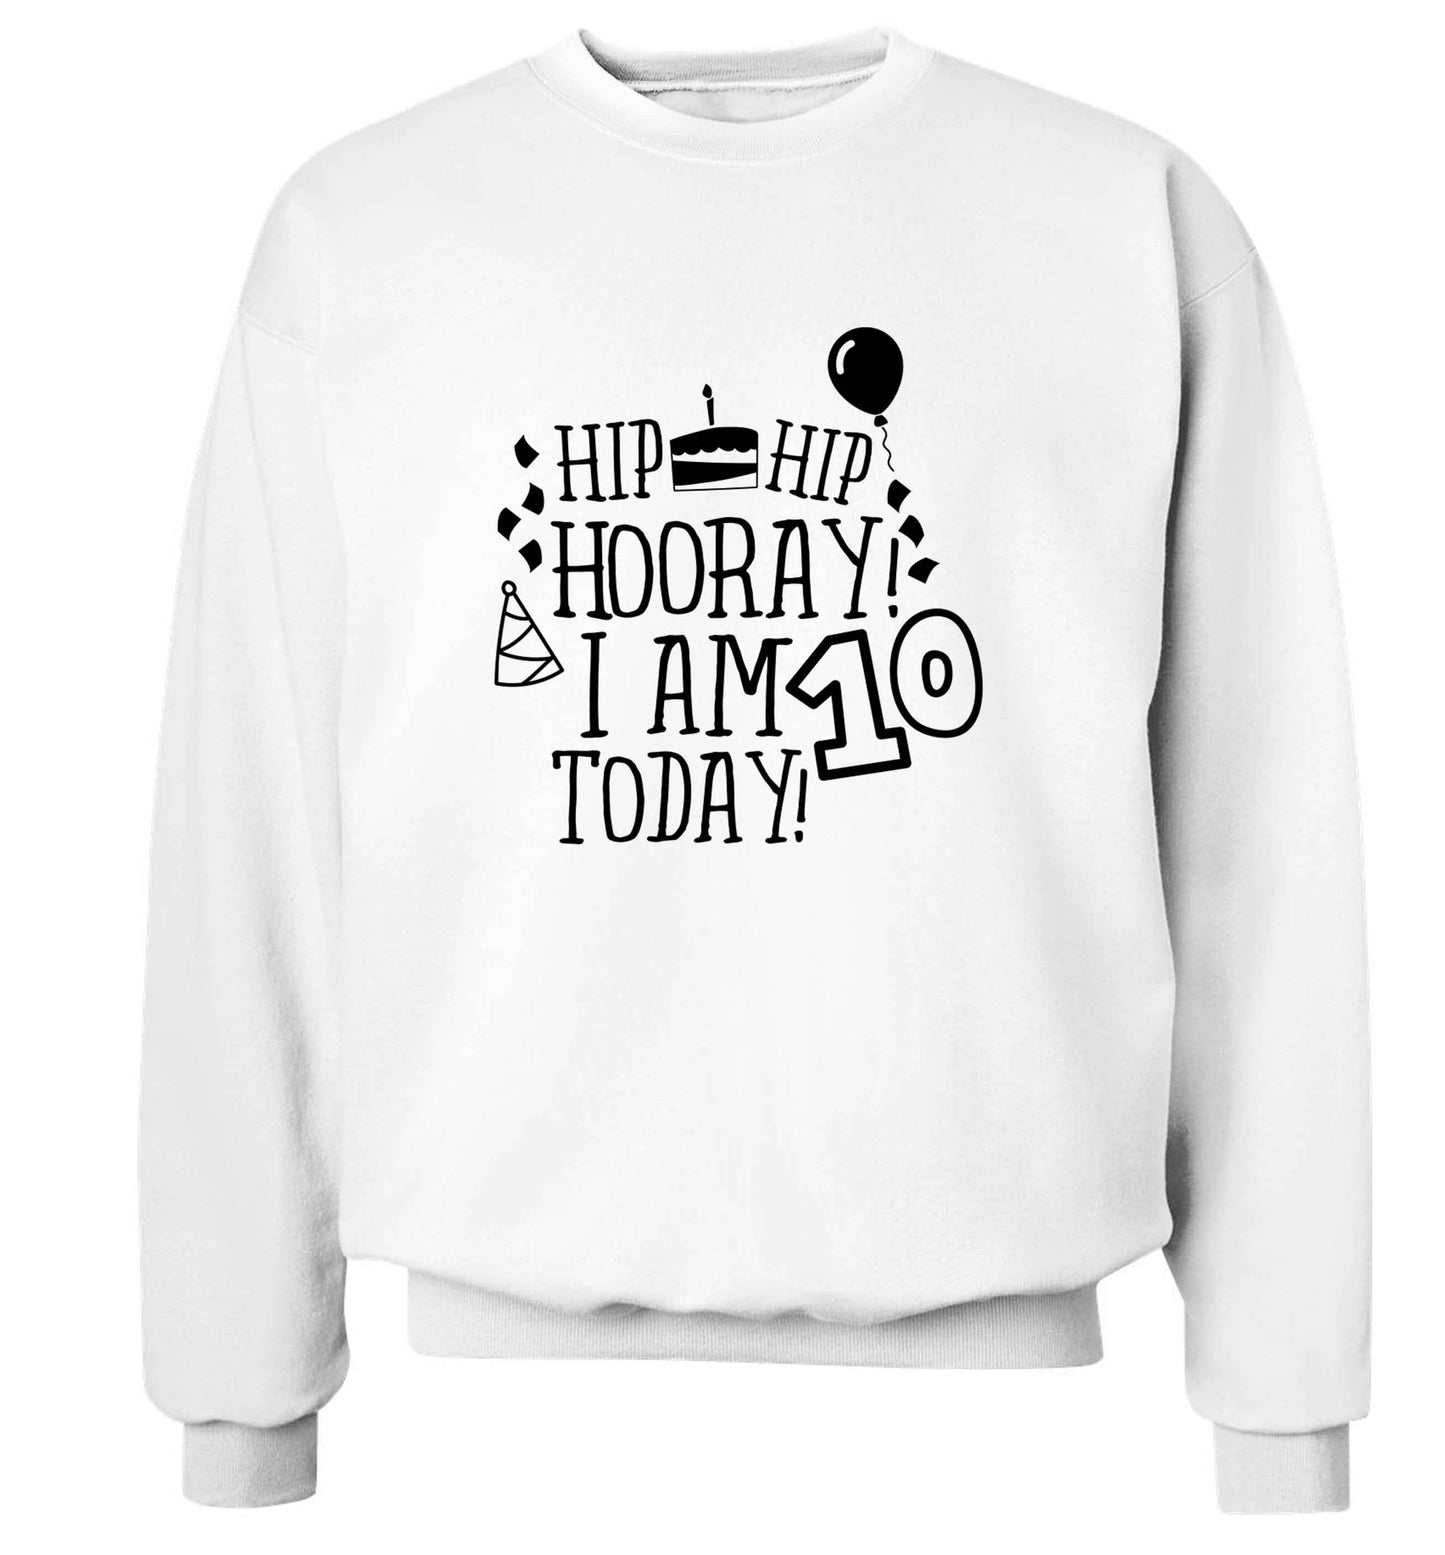 Hip hip hooray I am ten today! adult's unisex white sweater 2XL